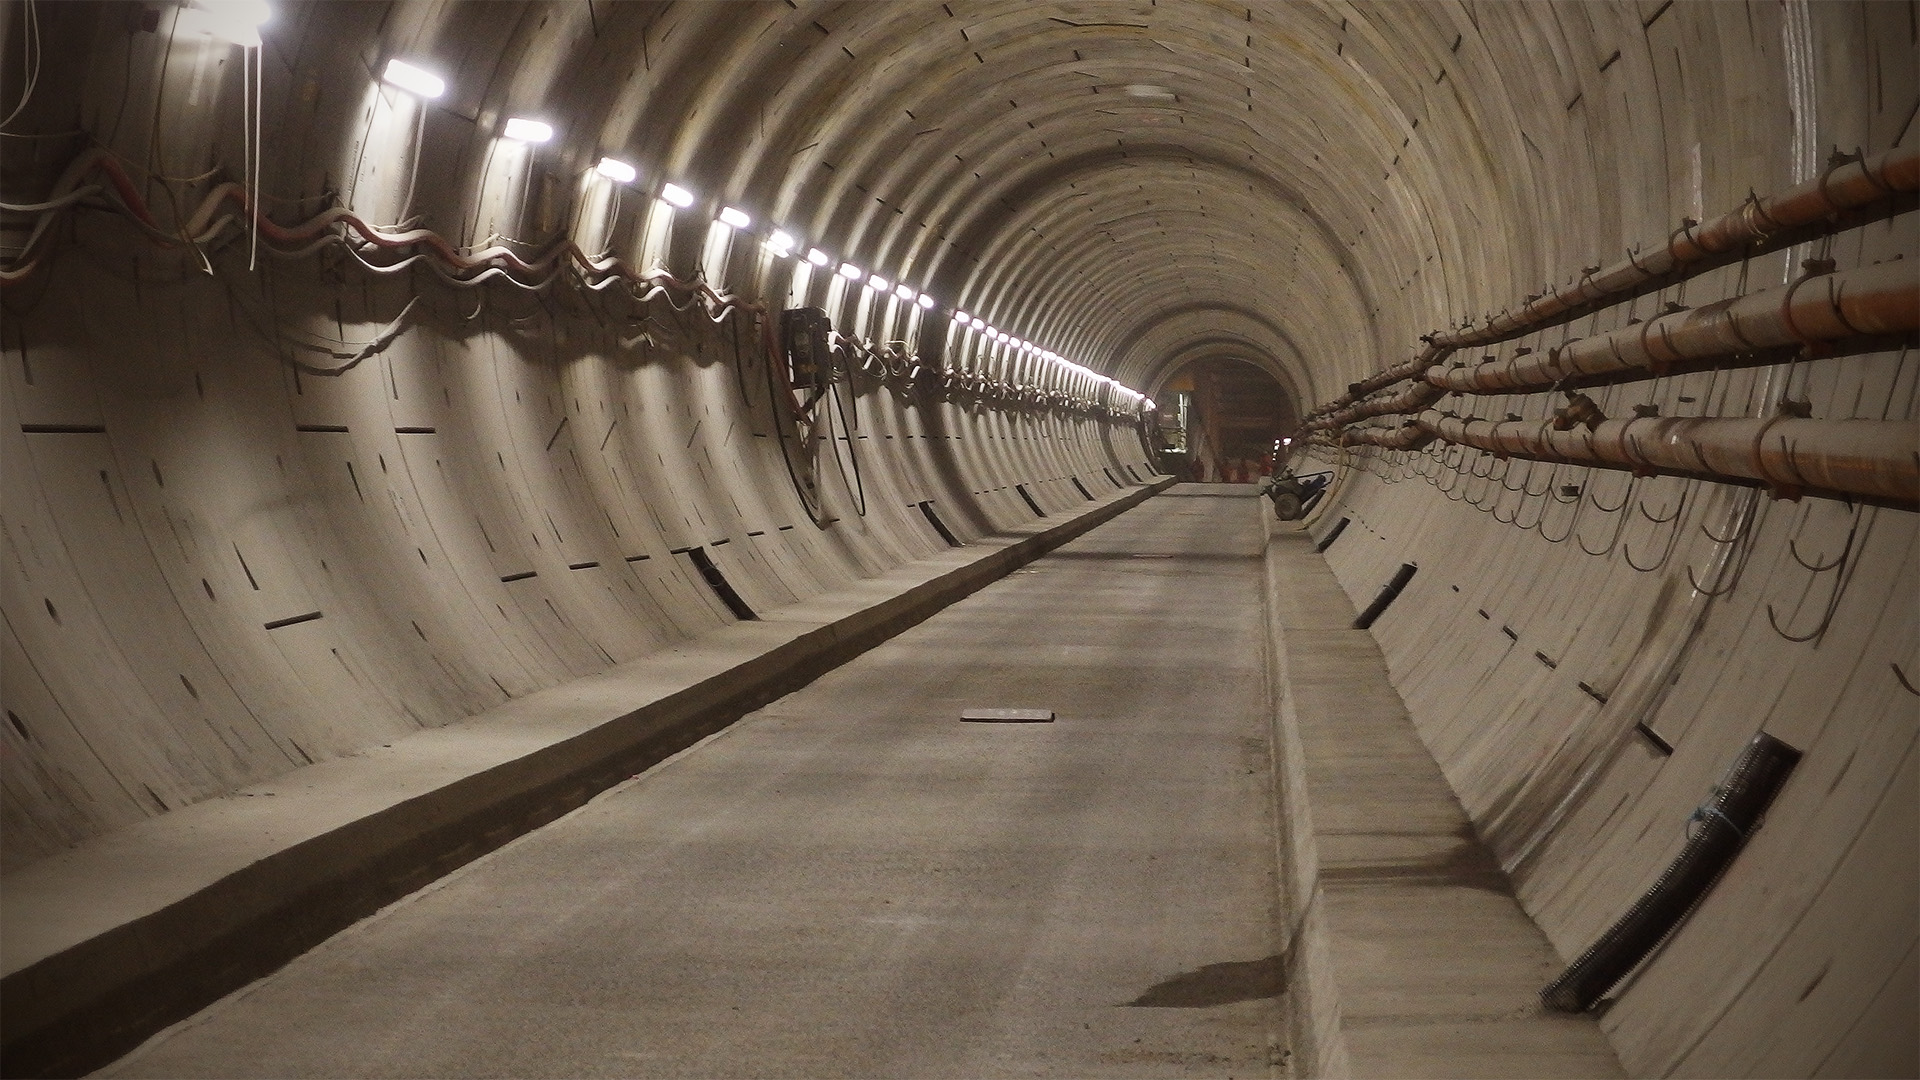 A straight tunnel climbs steadily, with a station visible at its summit